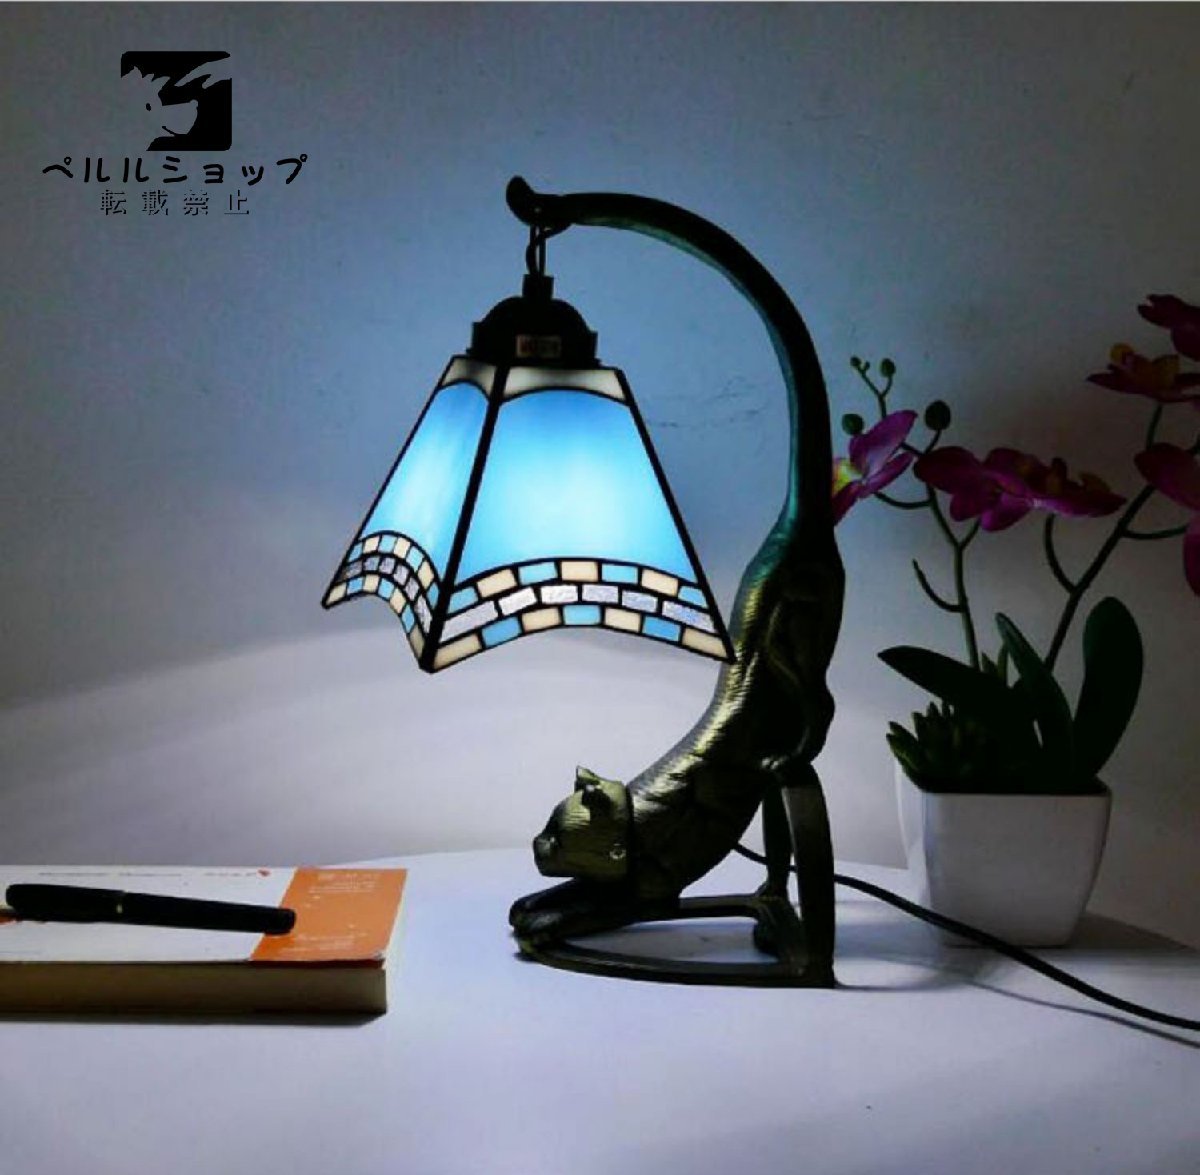 Tiffany lamp cat antique style Tiffany technique stained glass lighting table lamp interior, hand craft, handicraft, glass crafts, glass material